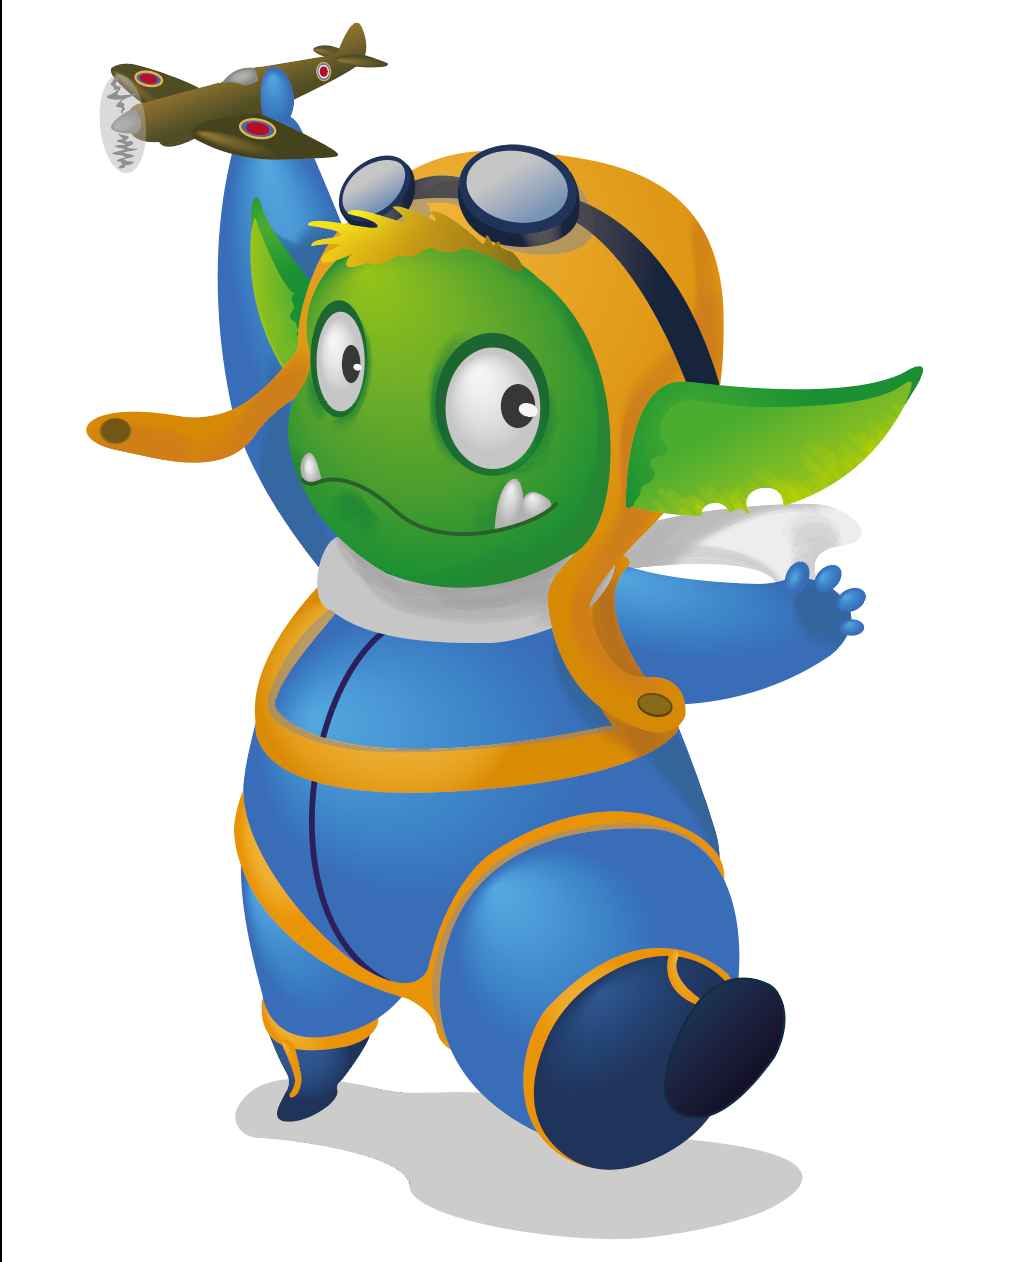 A green creature wearing a flight suit and goggles